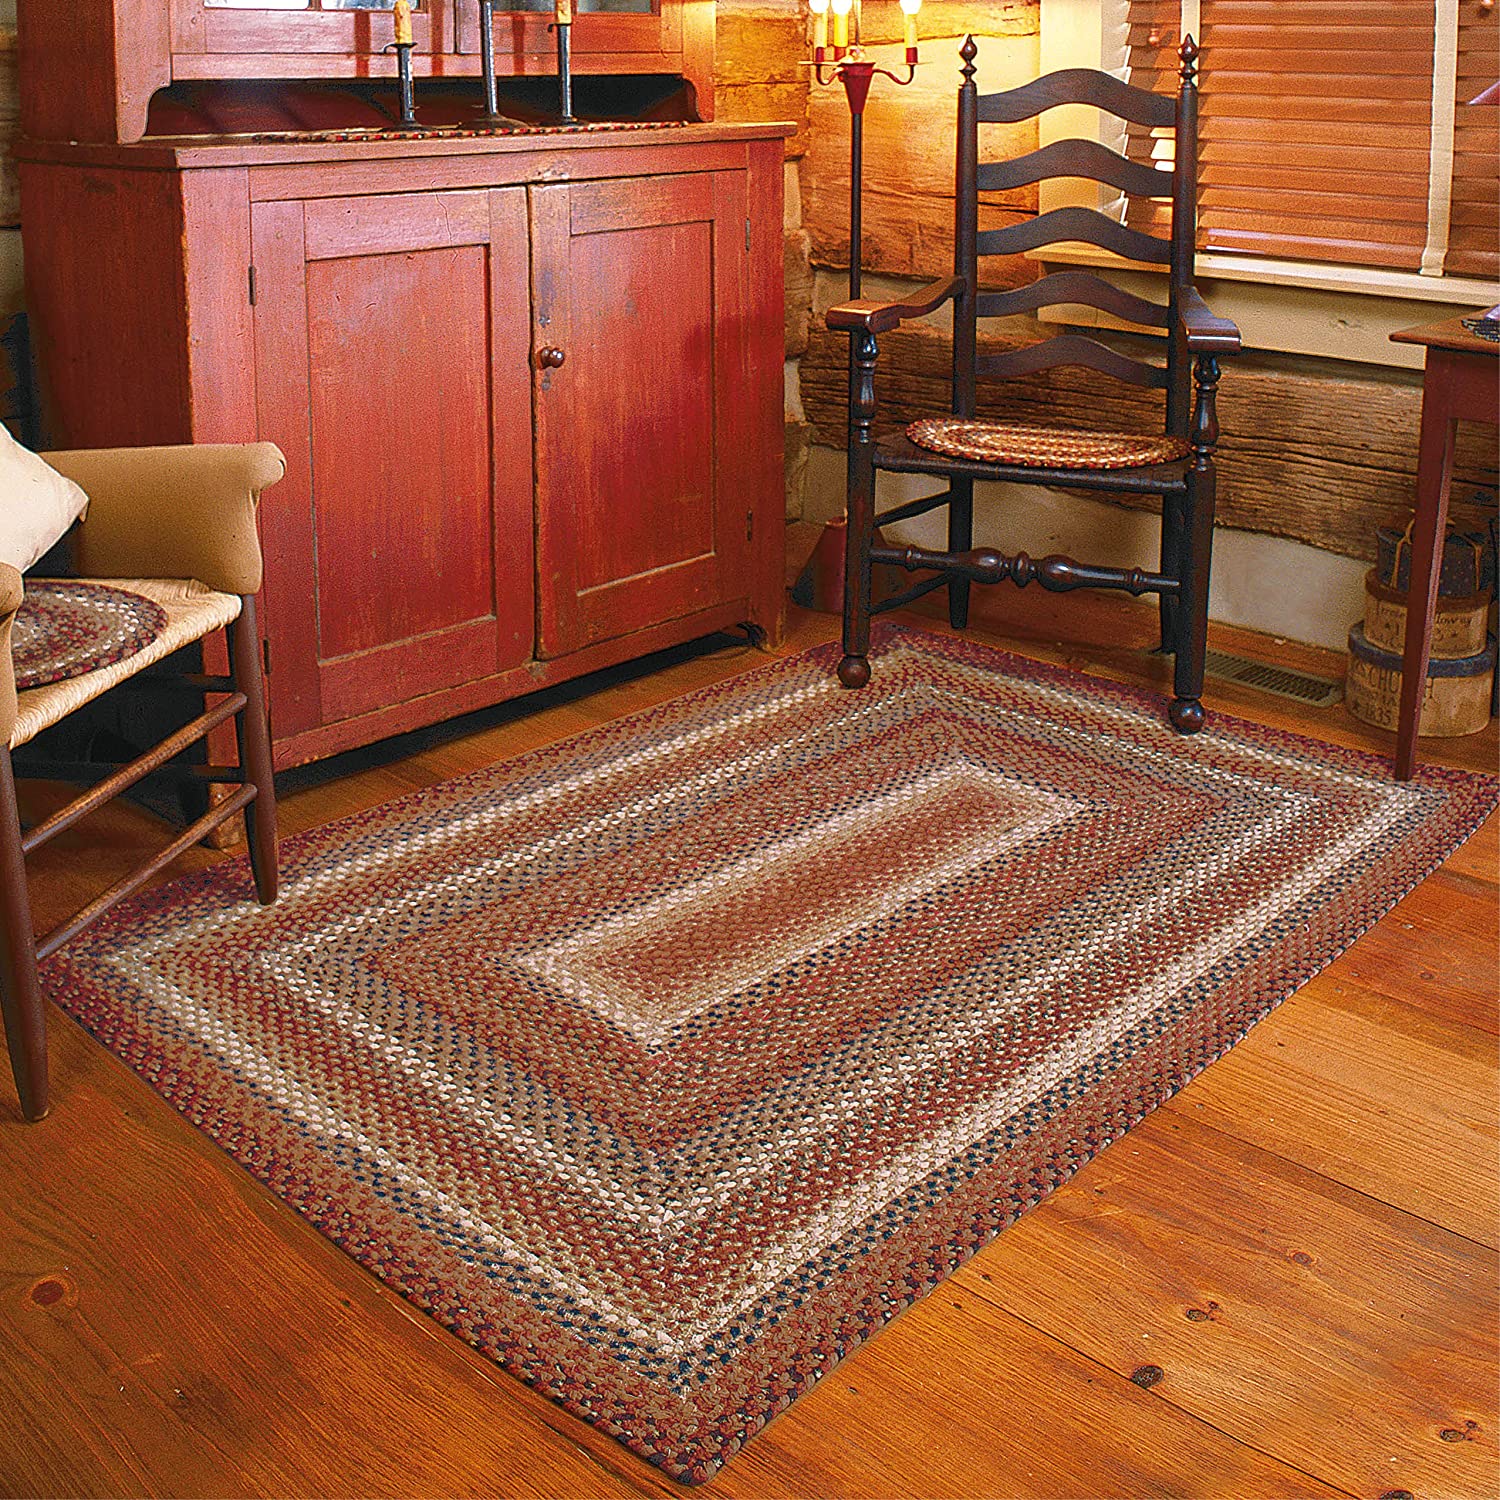  Homespice 20x30” Multi Color Rect. Braided Rug